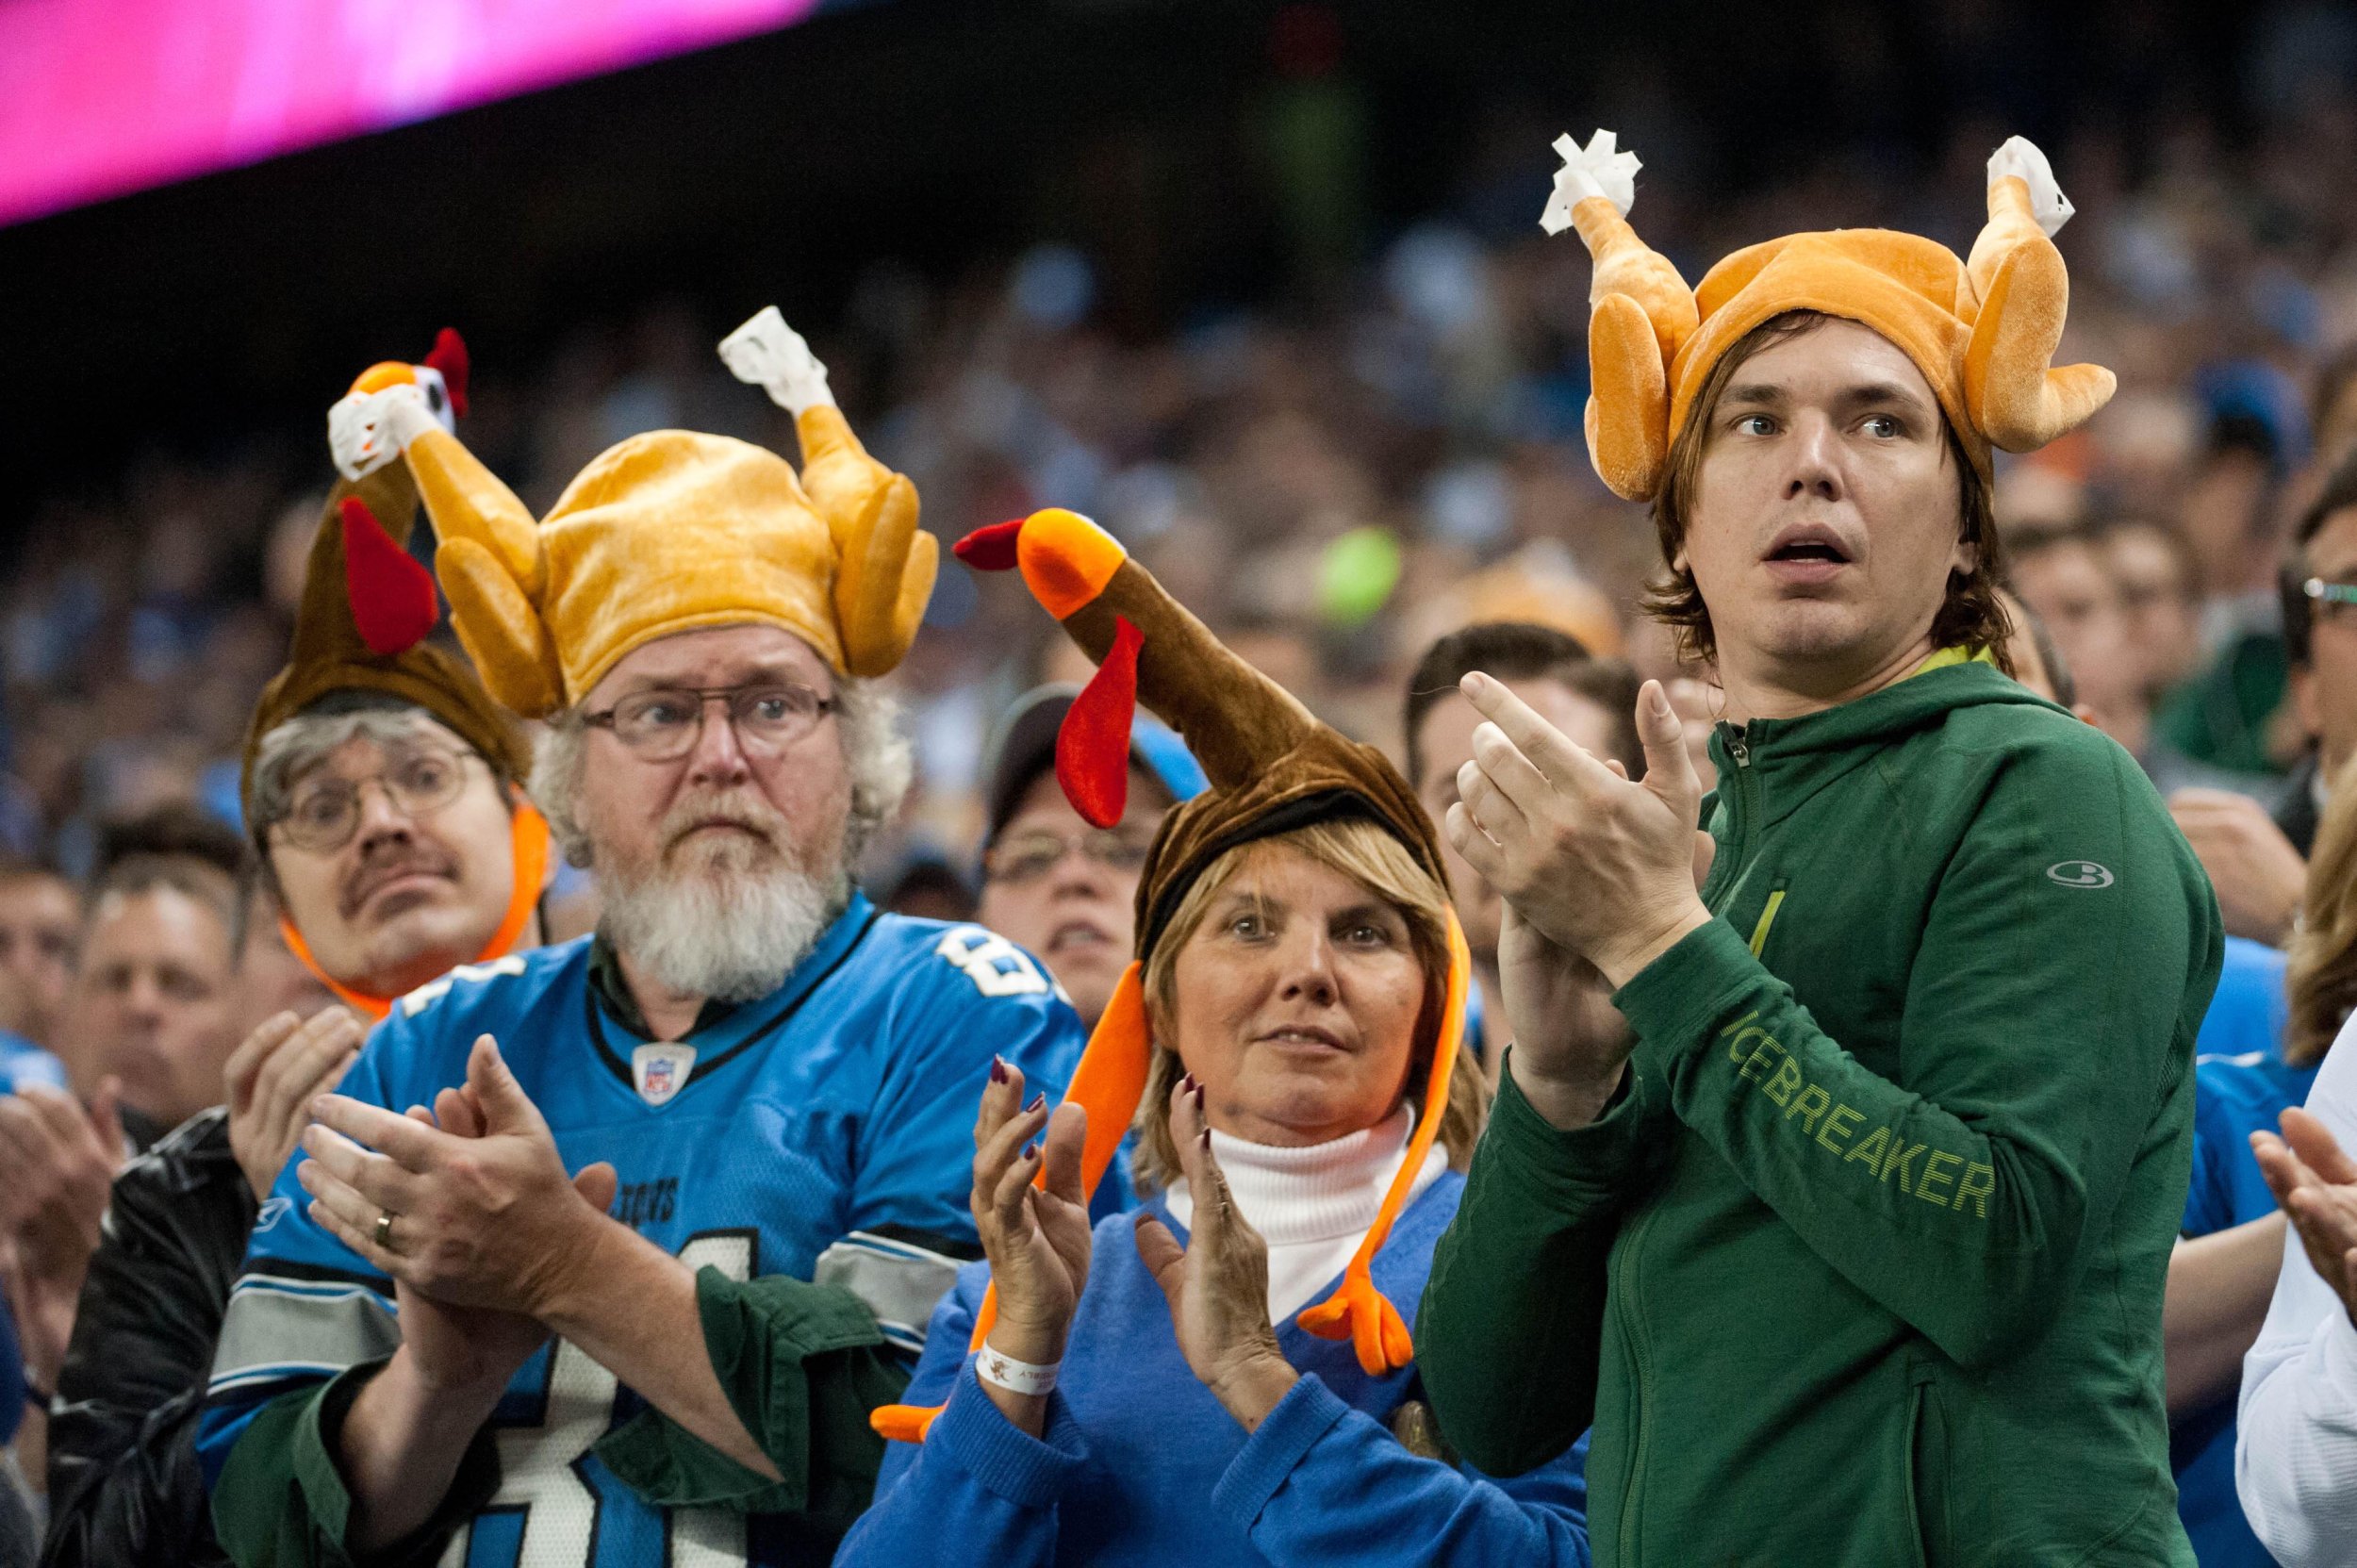 NFL TV schedule: What channel is Thanksgiving football on? (2022)